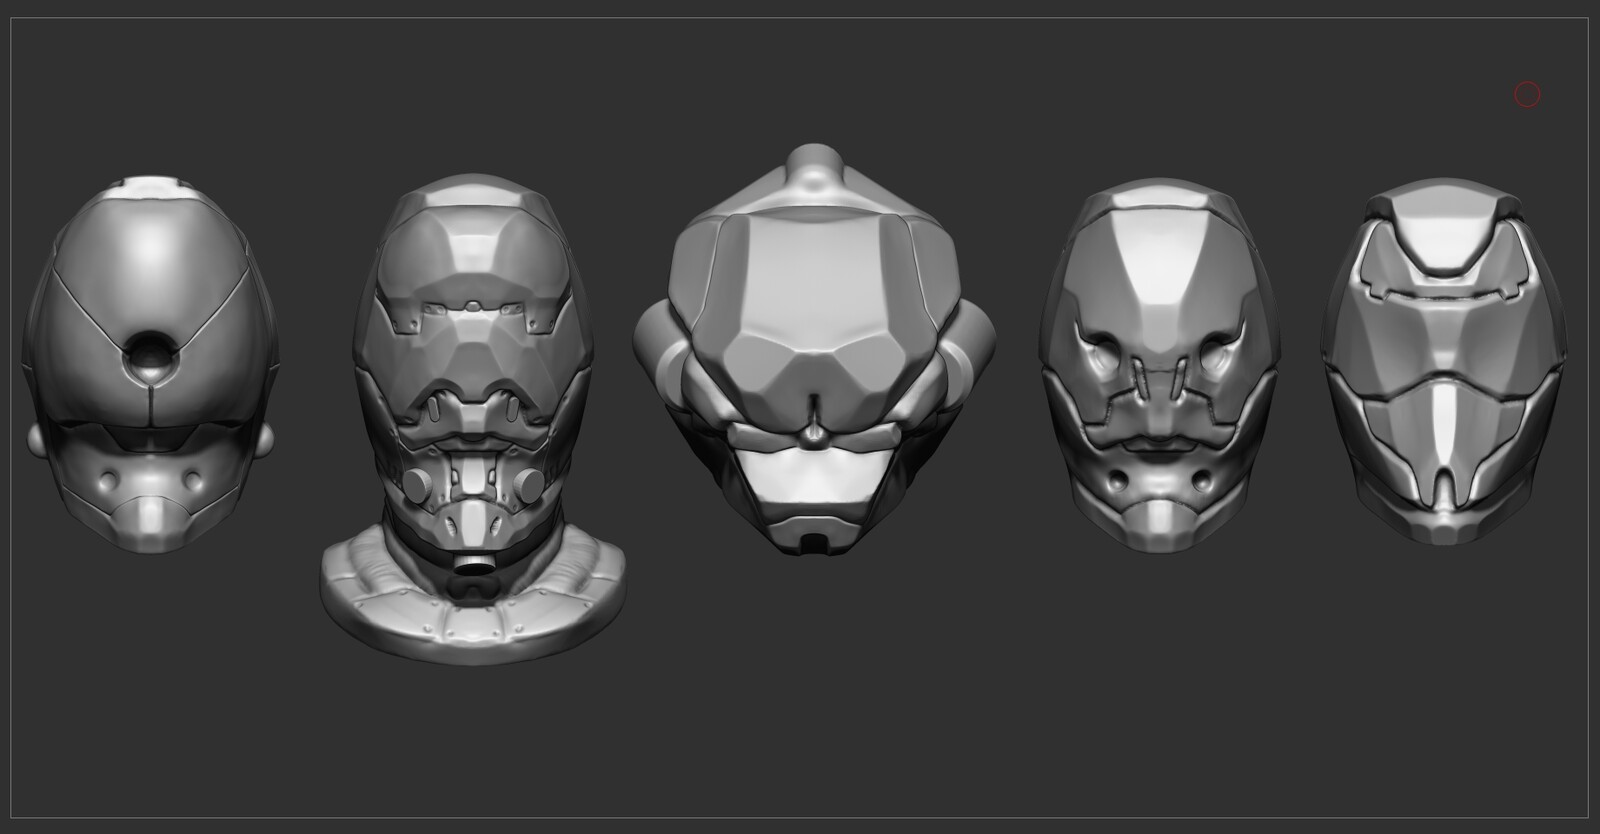 Several concepts of helmets made in Zbrush